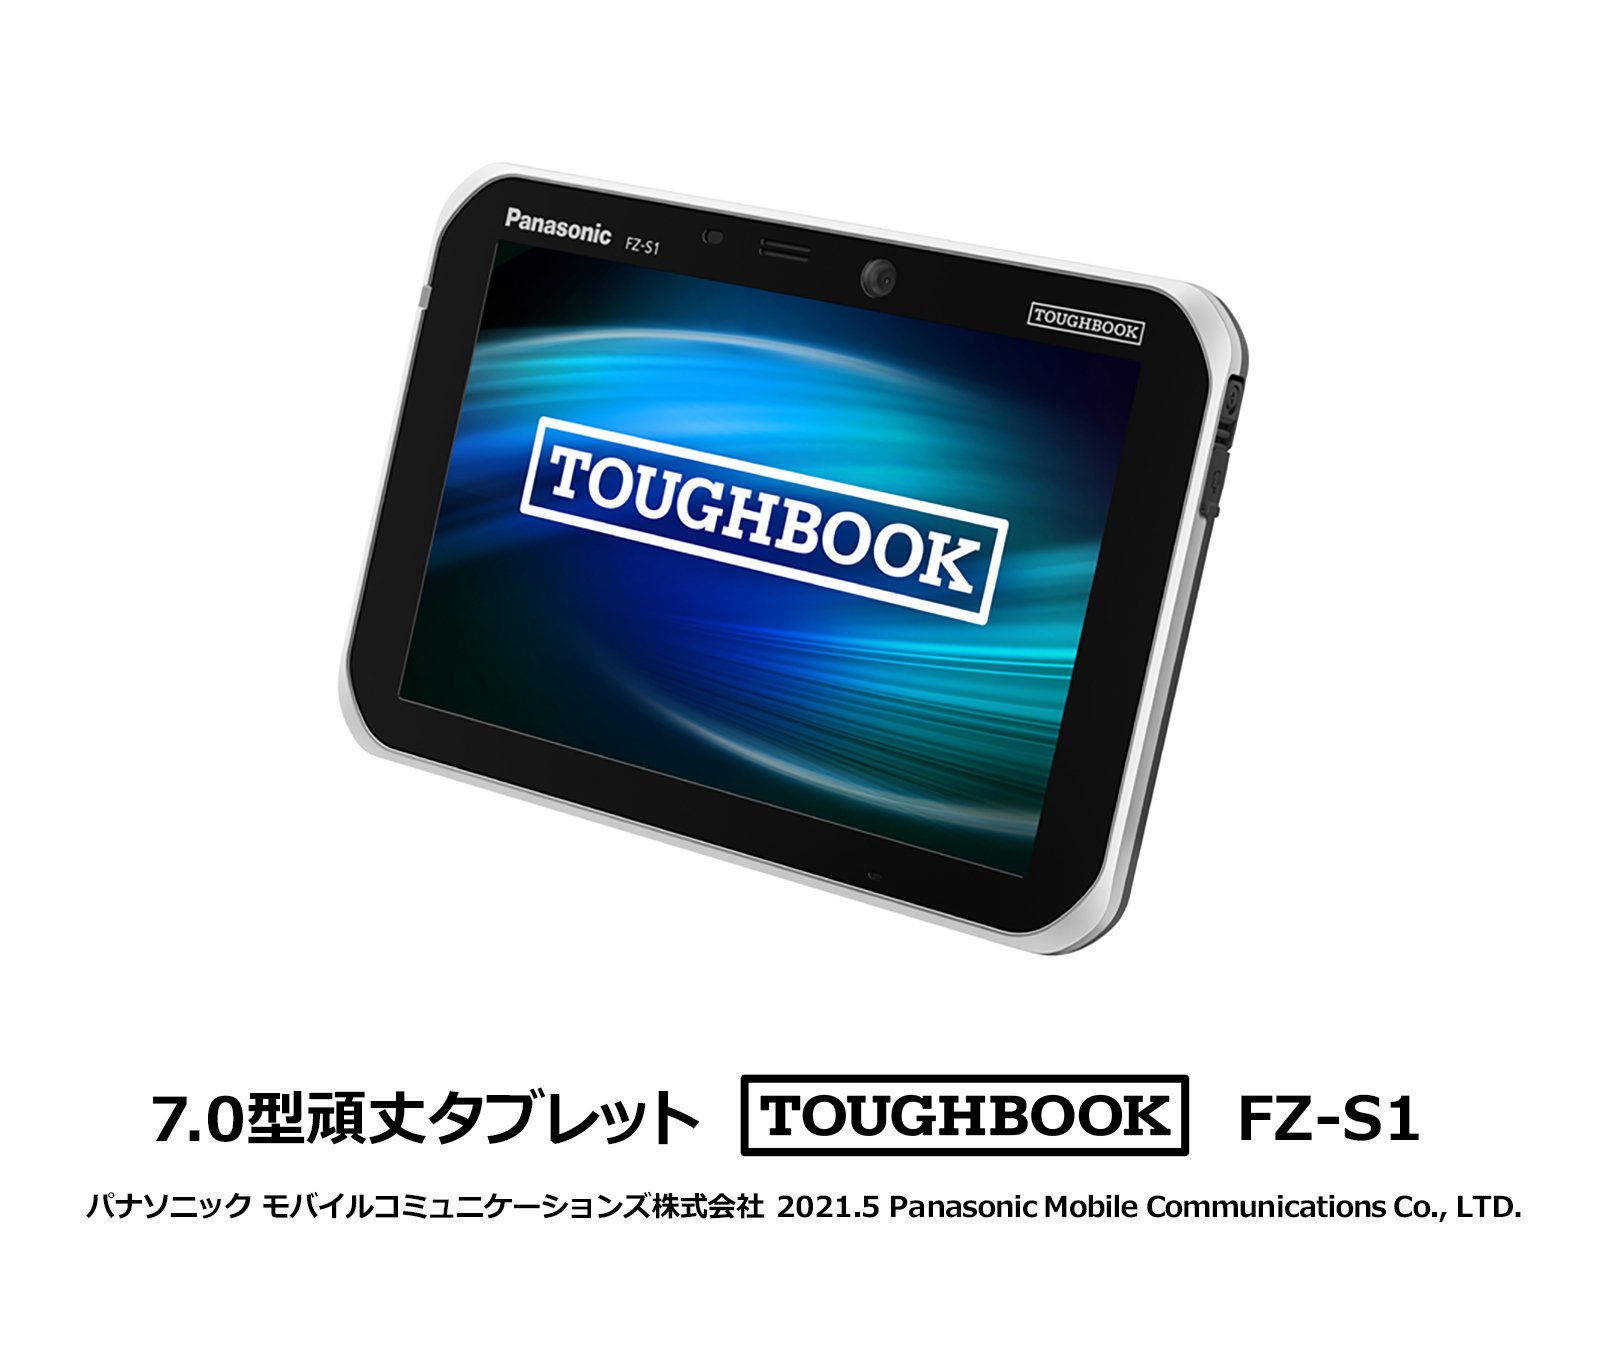 PC/タブレット タブレット 7.0型頑丈タブレット「TOUGHBOOK（タフブック）」FZ-S1を発売 | 企業 